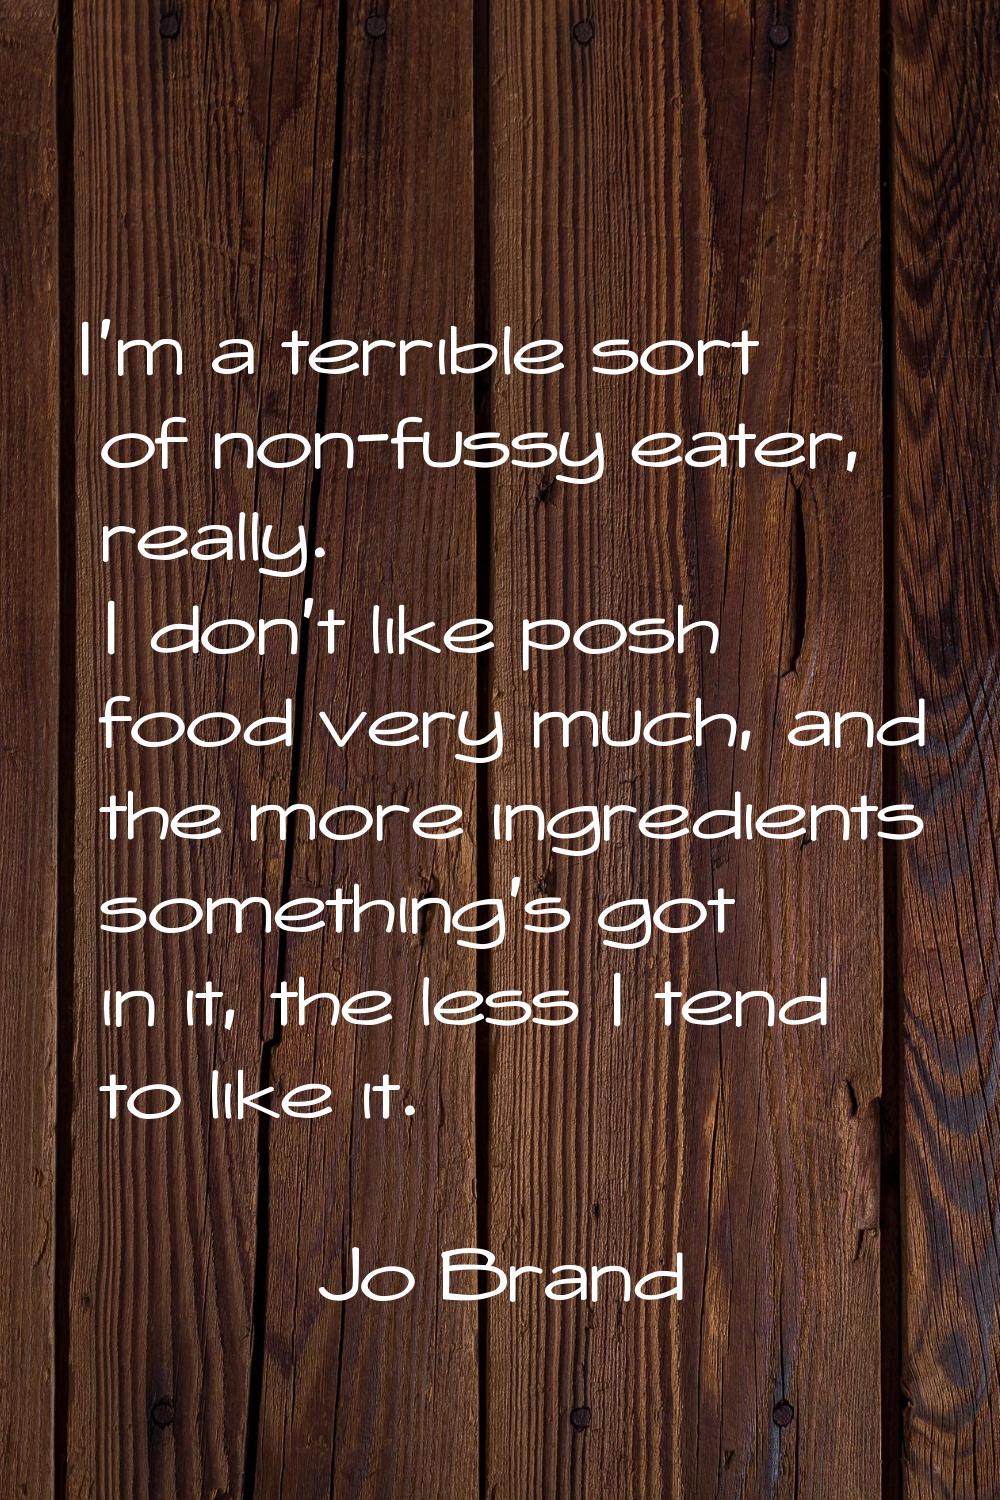 I'm a terrible sort of non-fussy eater, really. I don't like posh food very much, and the more ingr